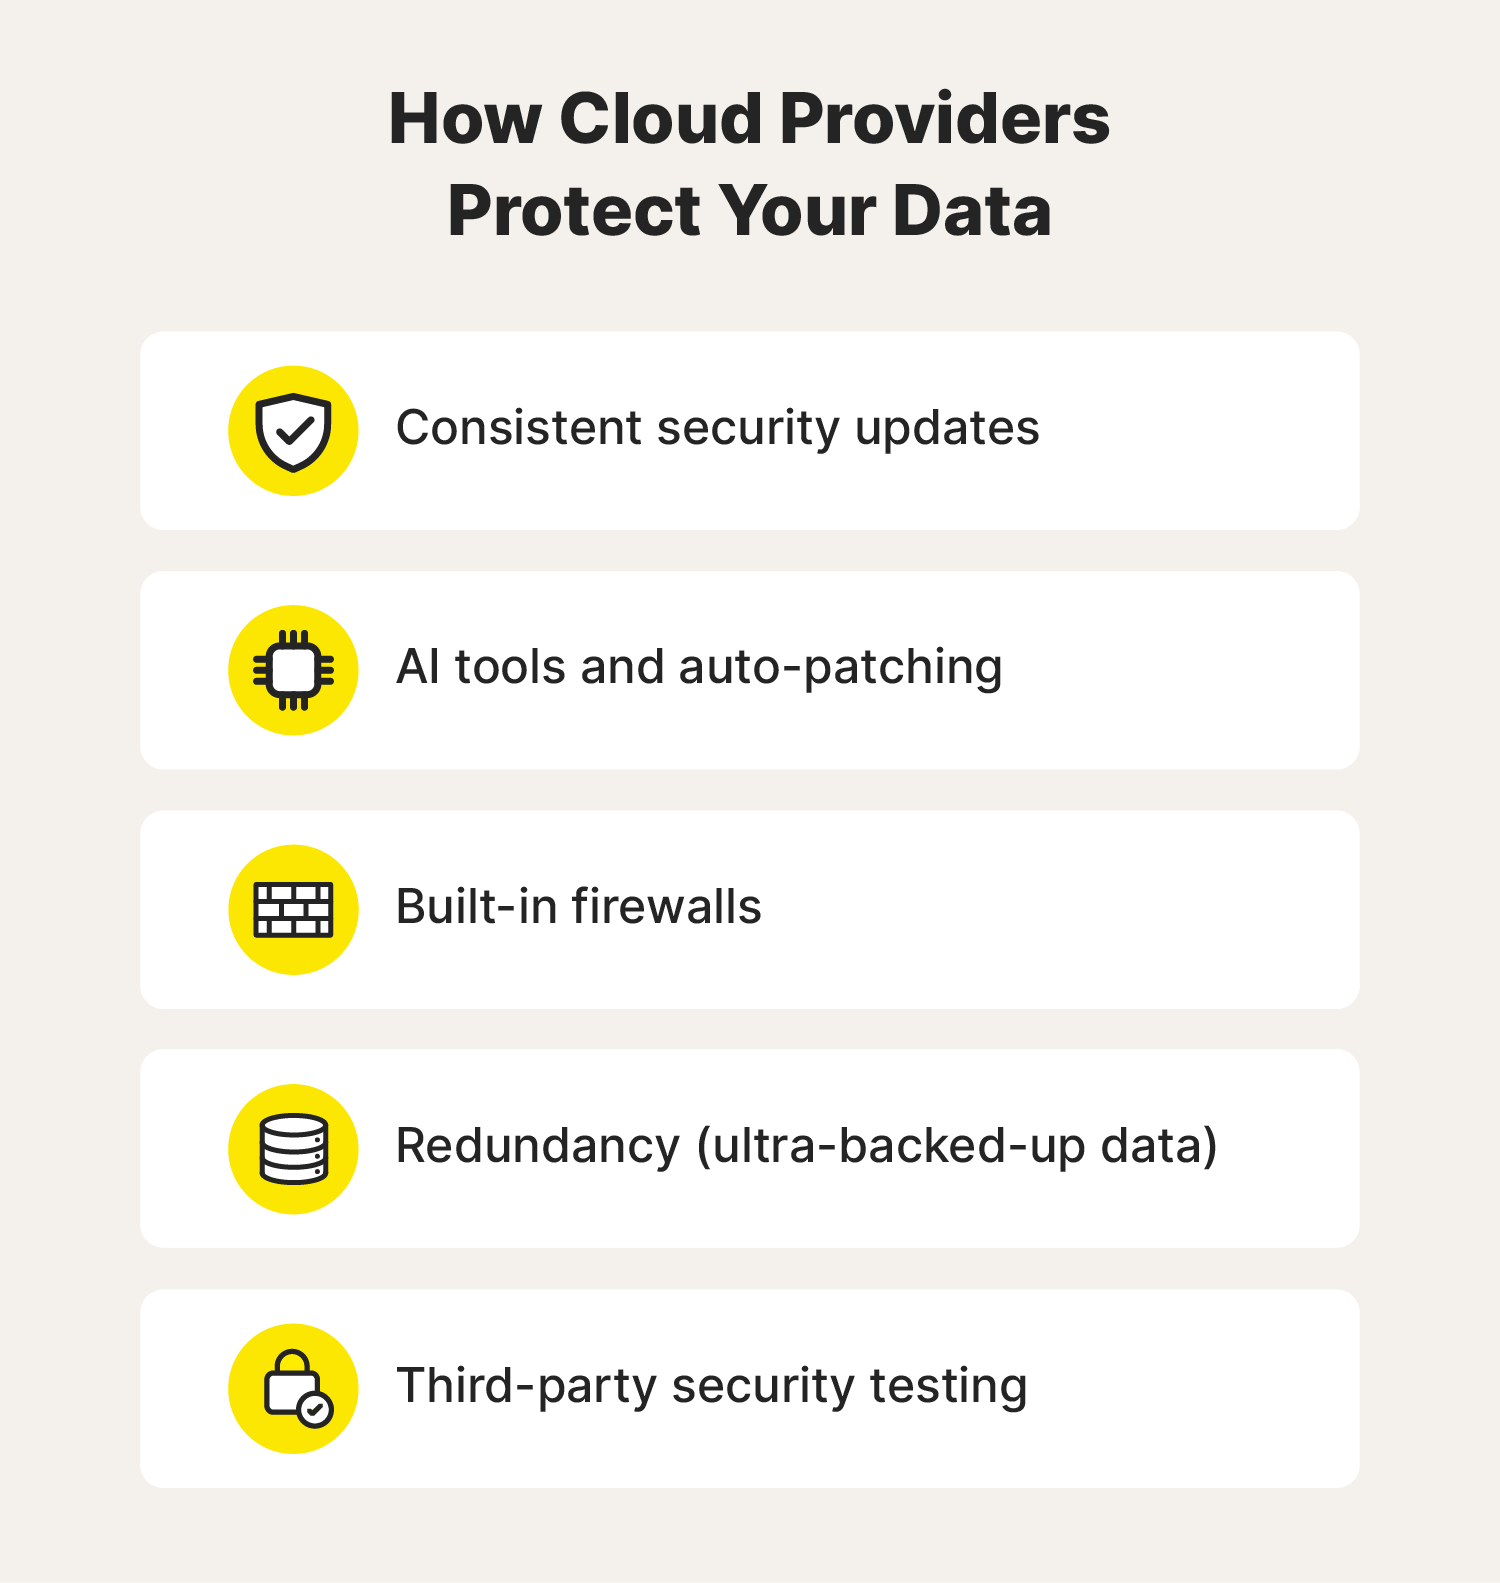 A few reasons cloud security is important.